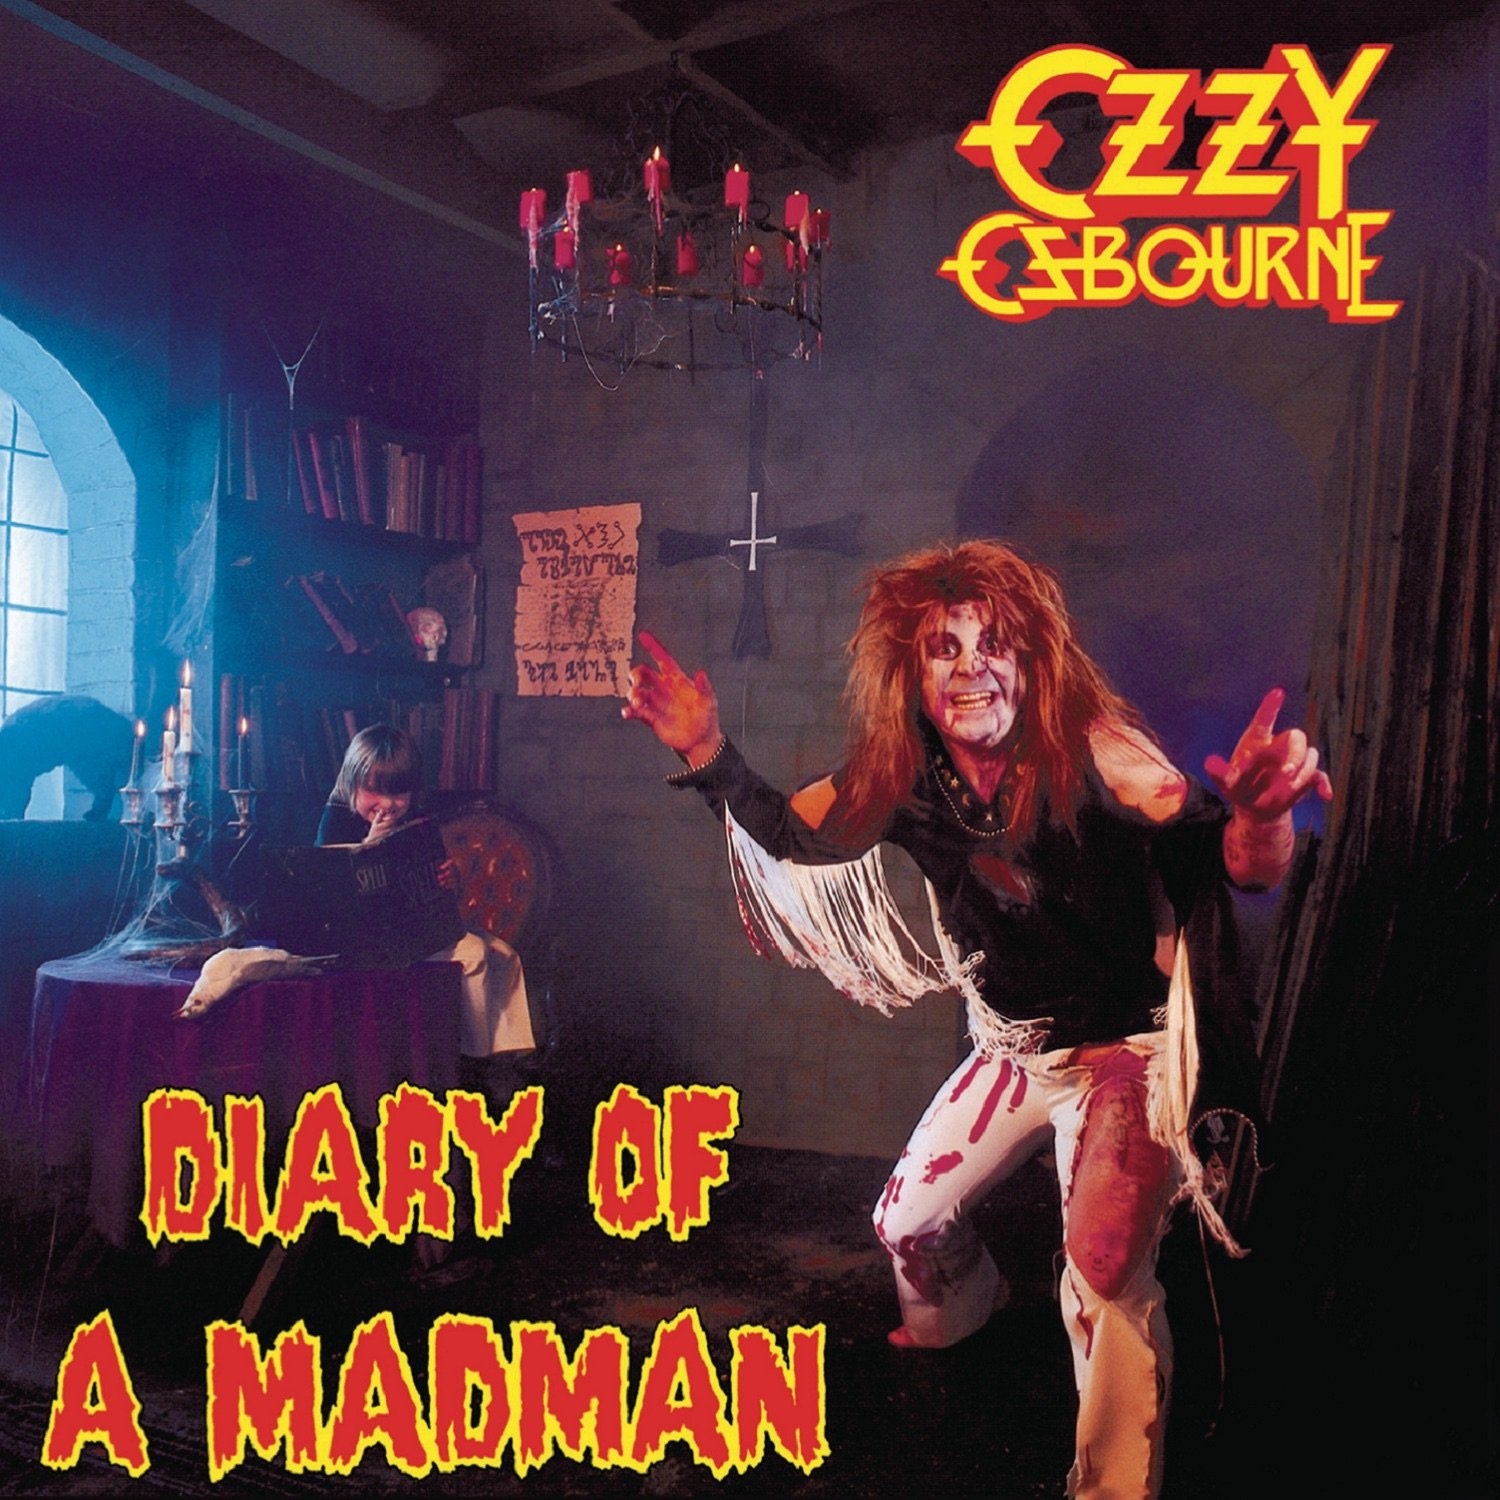 Металл Sony Osbourne, Ozzy - Diary of a Madman (40th anniversary) (Limited Marbled Vinyl) рок sony dream theater lost not forgotten archives master of puppets – live in barcelona 2002 limited gold vinyl